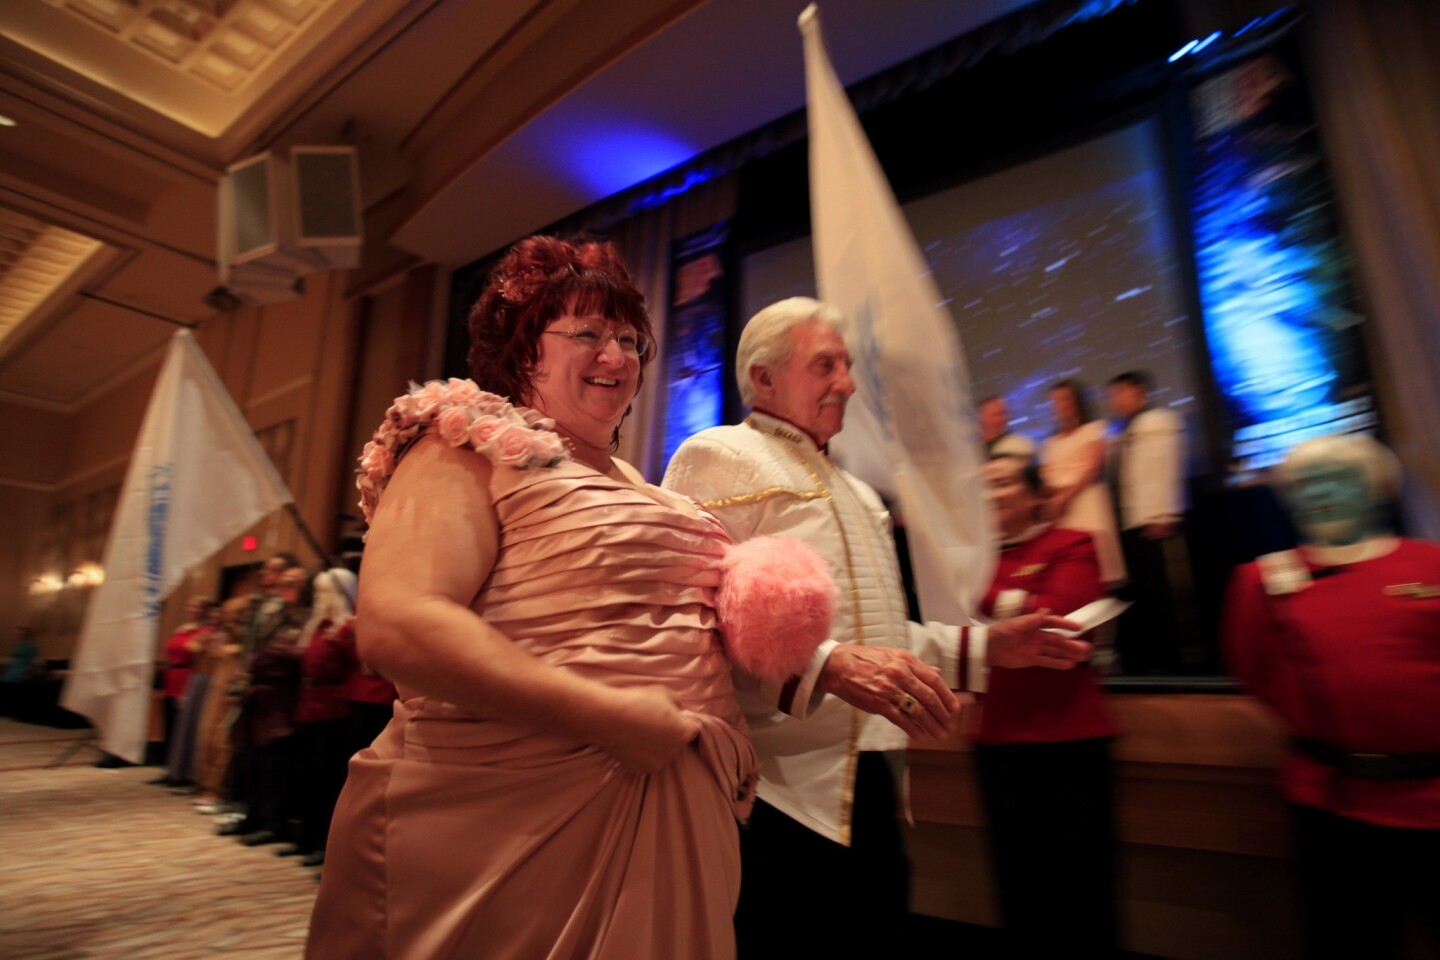 Amy Campbell, 49, is escorted by her father Fred Campbell during Amy and Mark's wedding at the annual "Star Trek" convention at the Rio hotel and casino in Las Vegas.